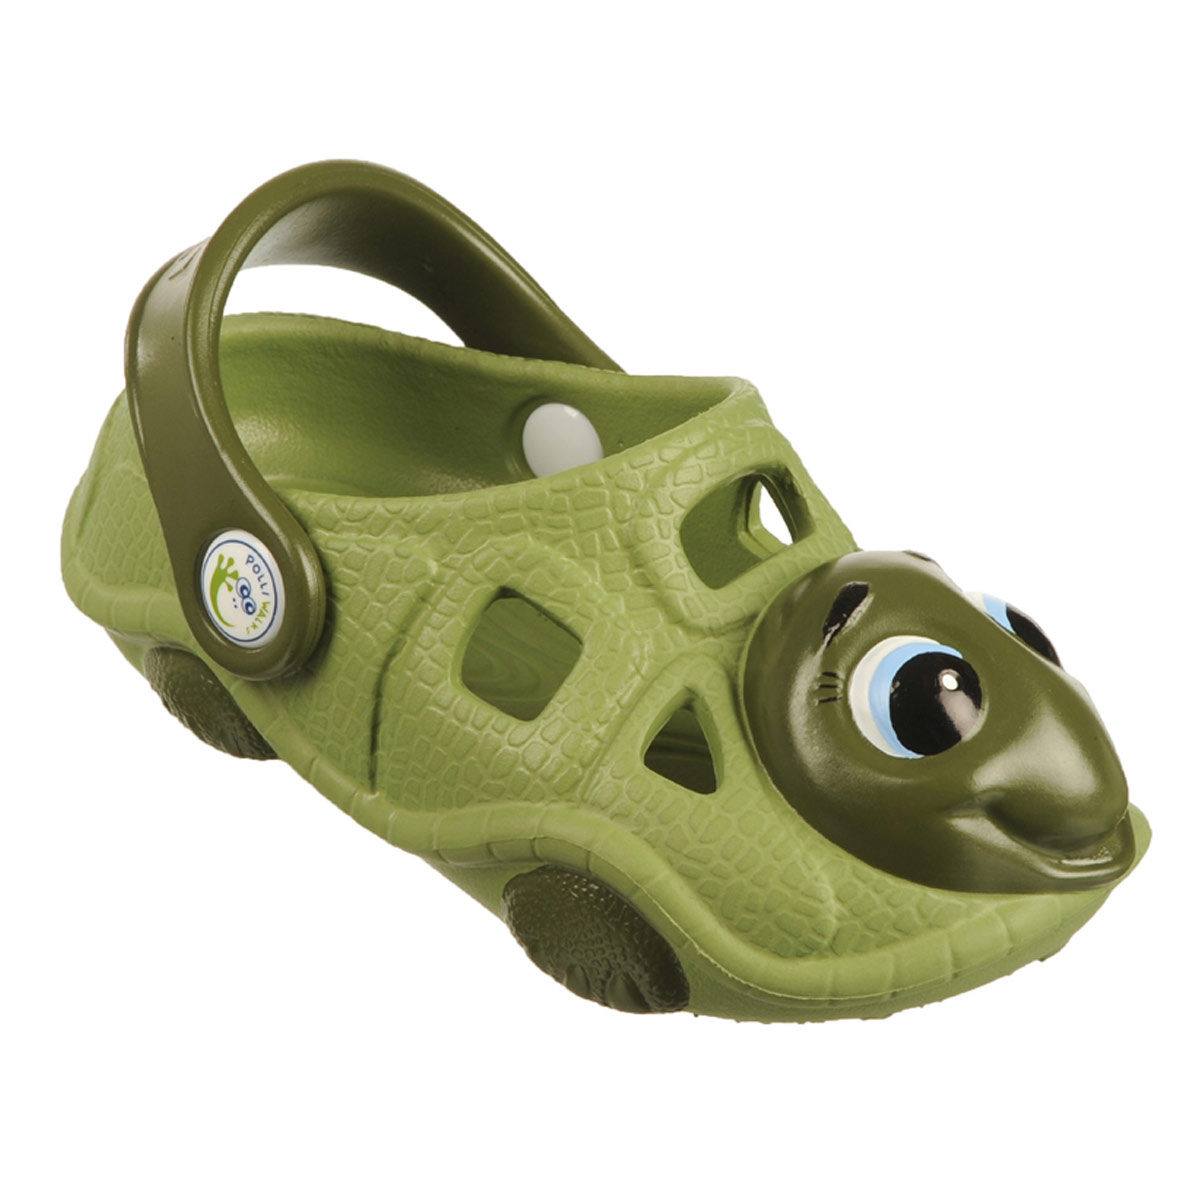 Polliwalks : Toddler shoes Timmy the Turtle Green # 12